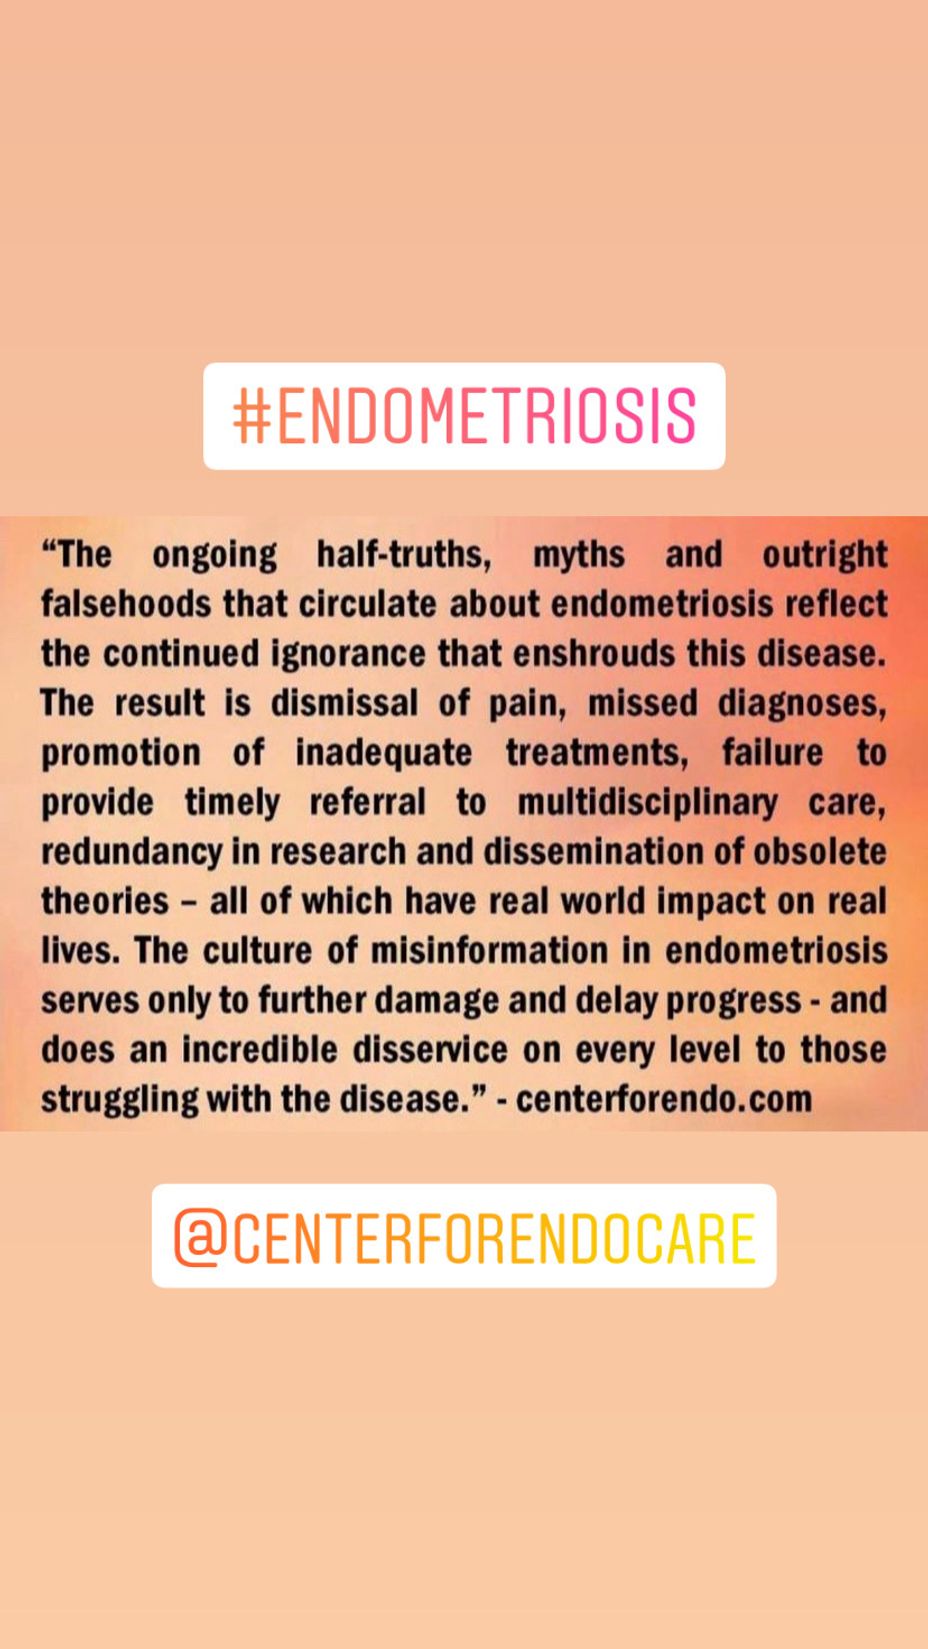 <p>Extra-pelvic <a href="https://themighty.com/topic/endometriosis/?label=endometriosis" class="tm-embed-link  tm-autolink health-map" data-id="5b23ce7c00553f33fe99213d" data-name="endometriosis" title="endometriosis" target="_blank">endometriosis</a> isn’t rare; <a href="https://themighty.com/topic/endometriosis/?label=endometriosis" class="tm-embed-link  tm-autolink health-map" data-id="5b23ce7c00553f33fe99213d" data-name="endometriosis" title="endometriosis" target="_blank">endometriosis</a></link> specialists are</p>